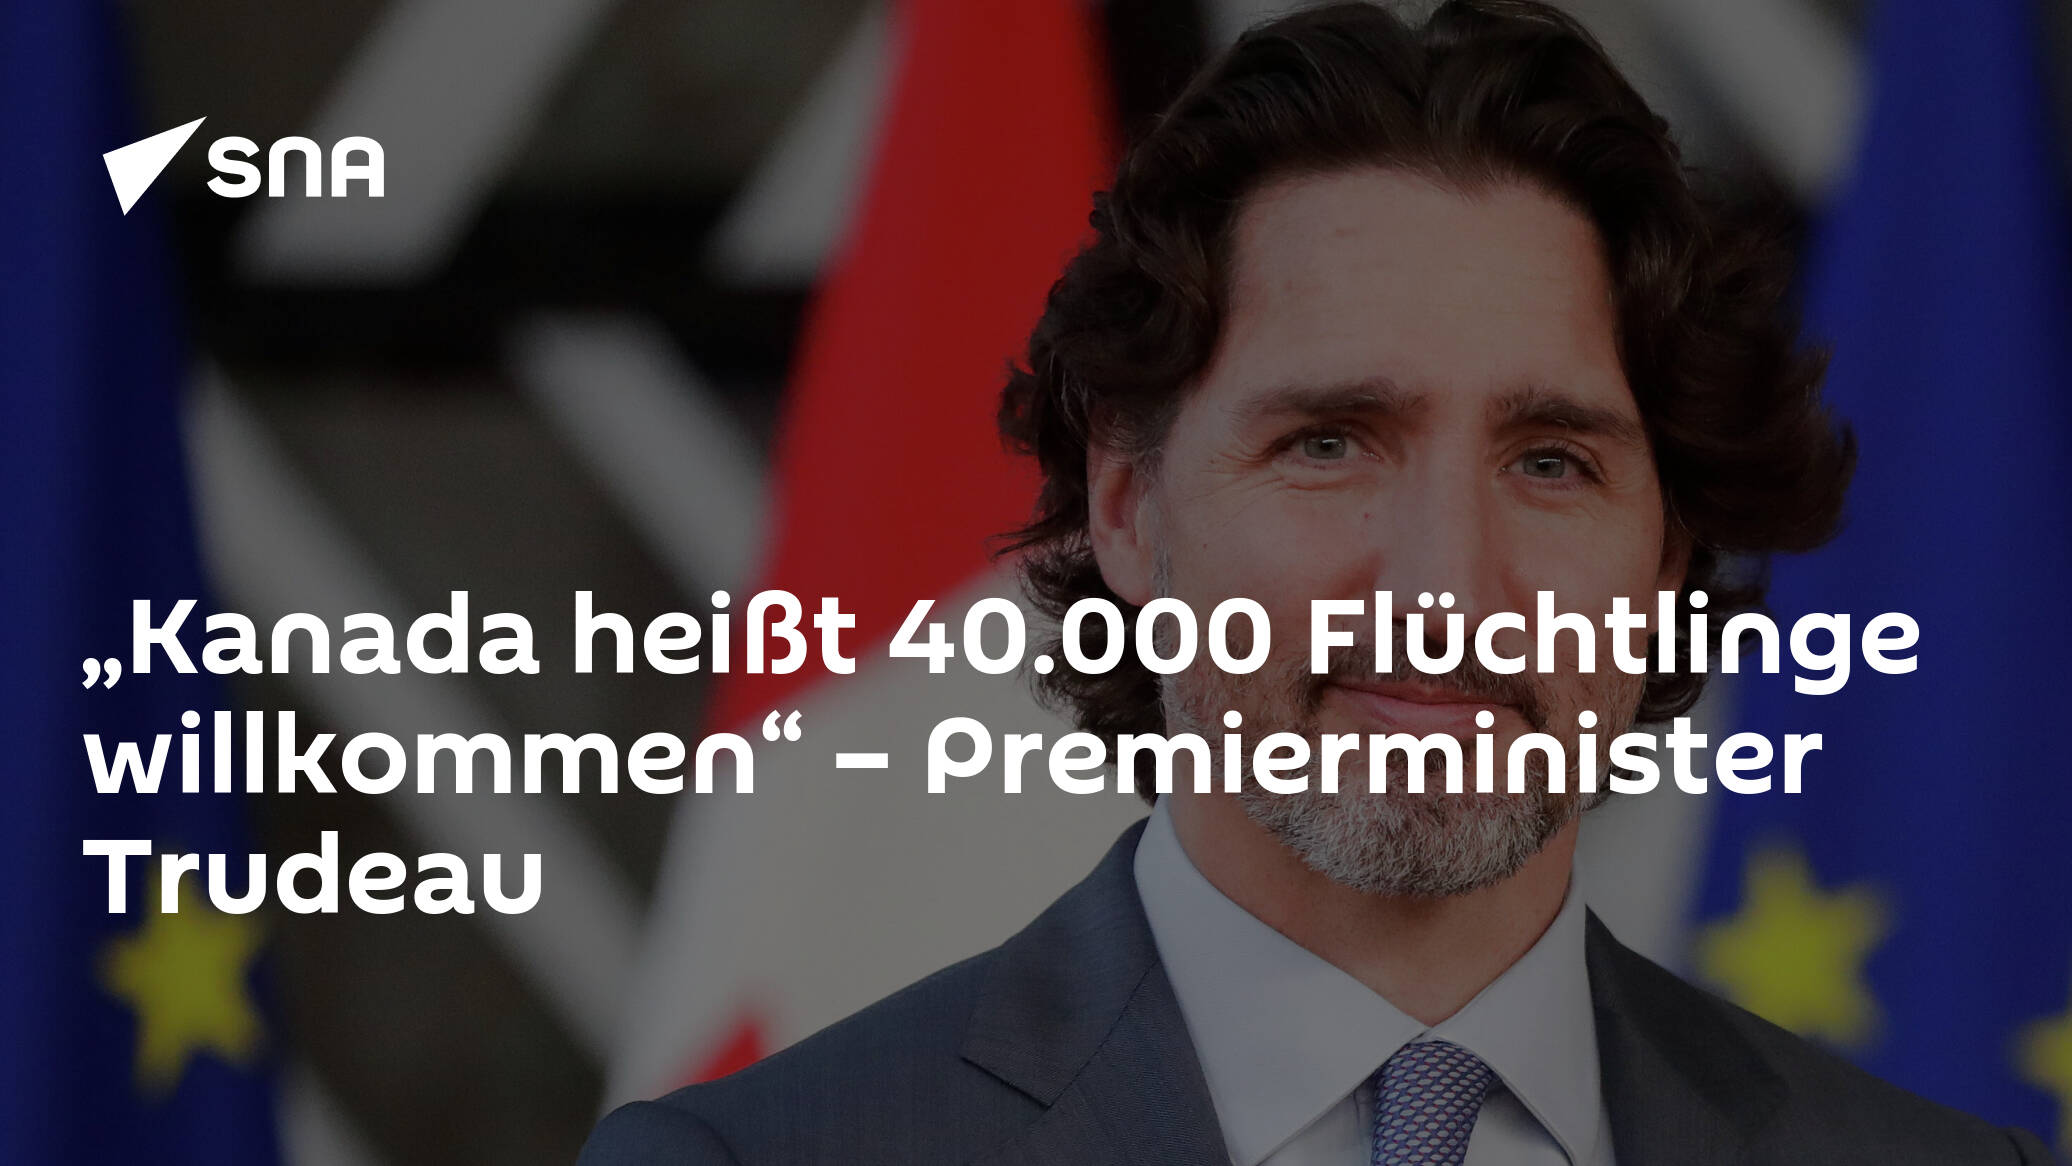 “Canada welcomes 40,000 refugees” - Prime Minister Trudeau